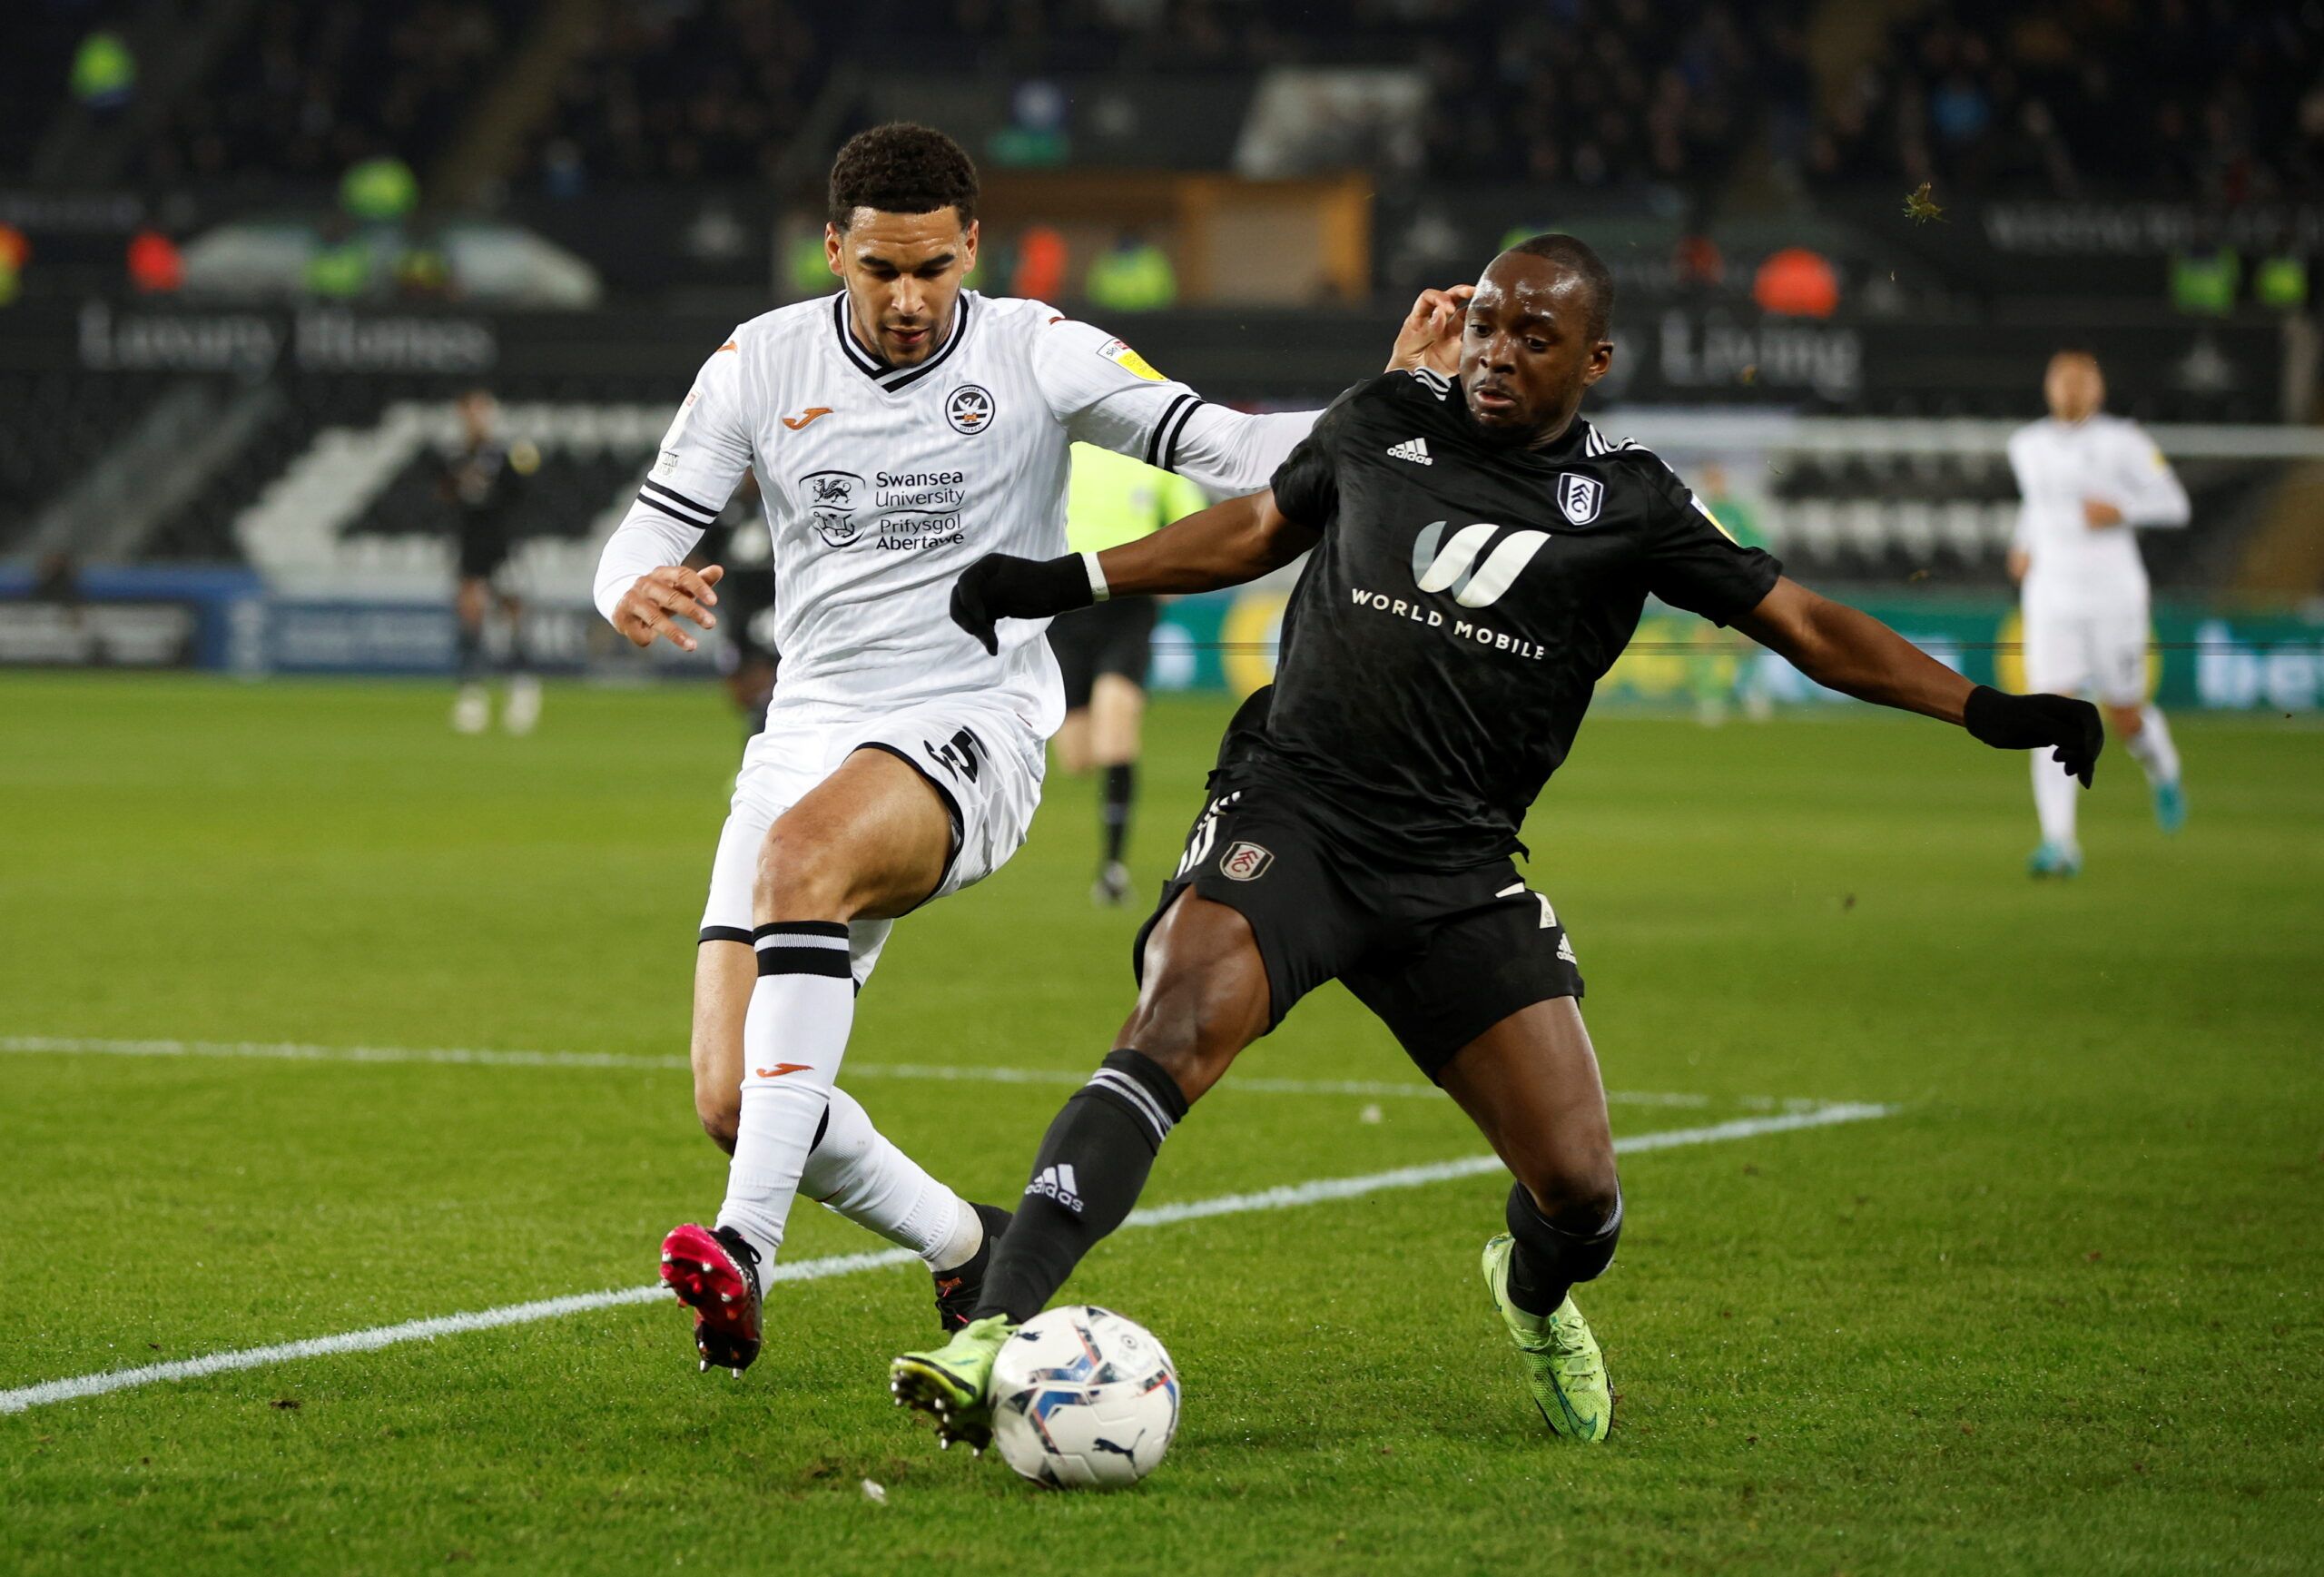 Soccer Football - Championship - Swansea City v Fulham - Swansea.com Stadium, Swansea, Britain - March 8, 2022  Swansea City's Ben Cabango in action with Fulham?s Needkens Kebano  Action Images/John Sibley  EDITORIAL USE ONLY. No use with unauthorized audio, video, data, fixture lists, club/league logos or 